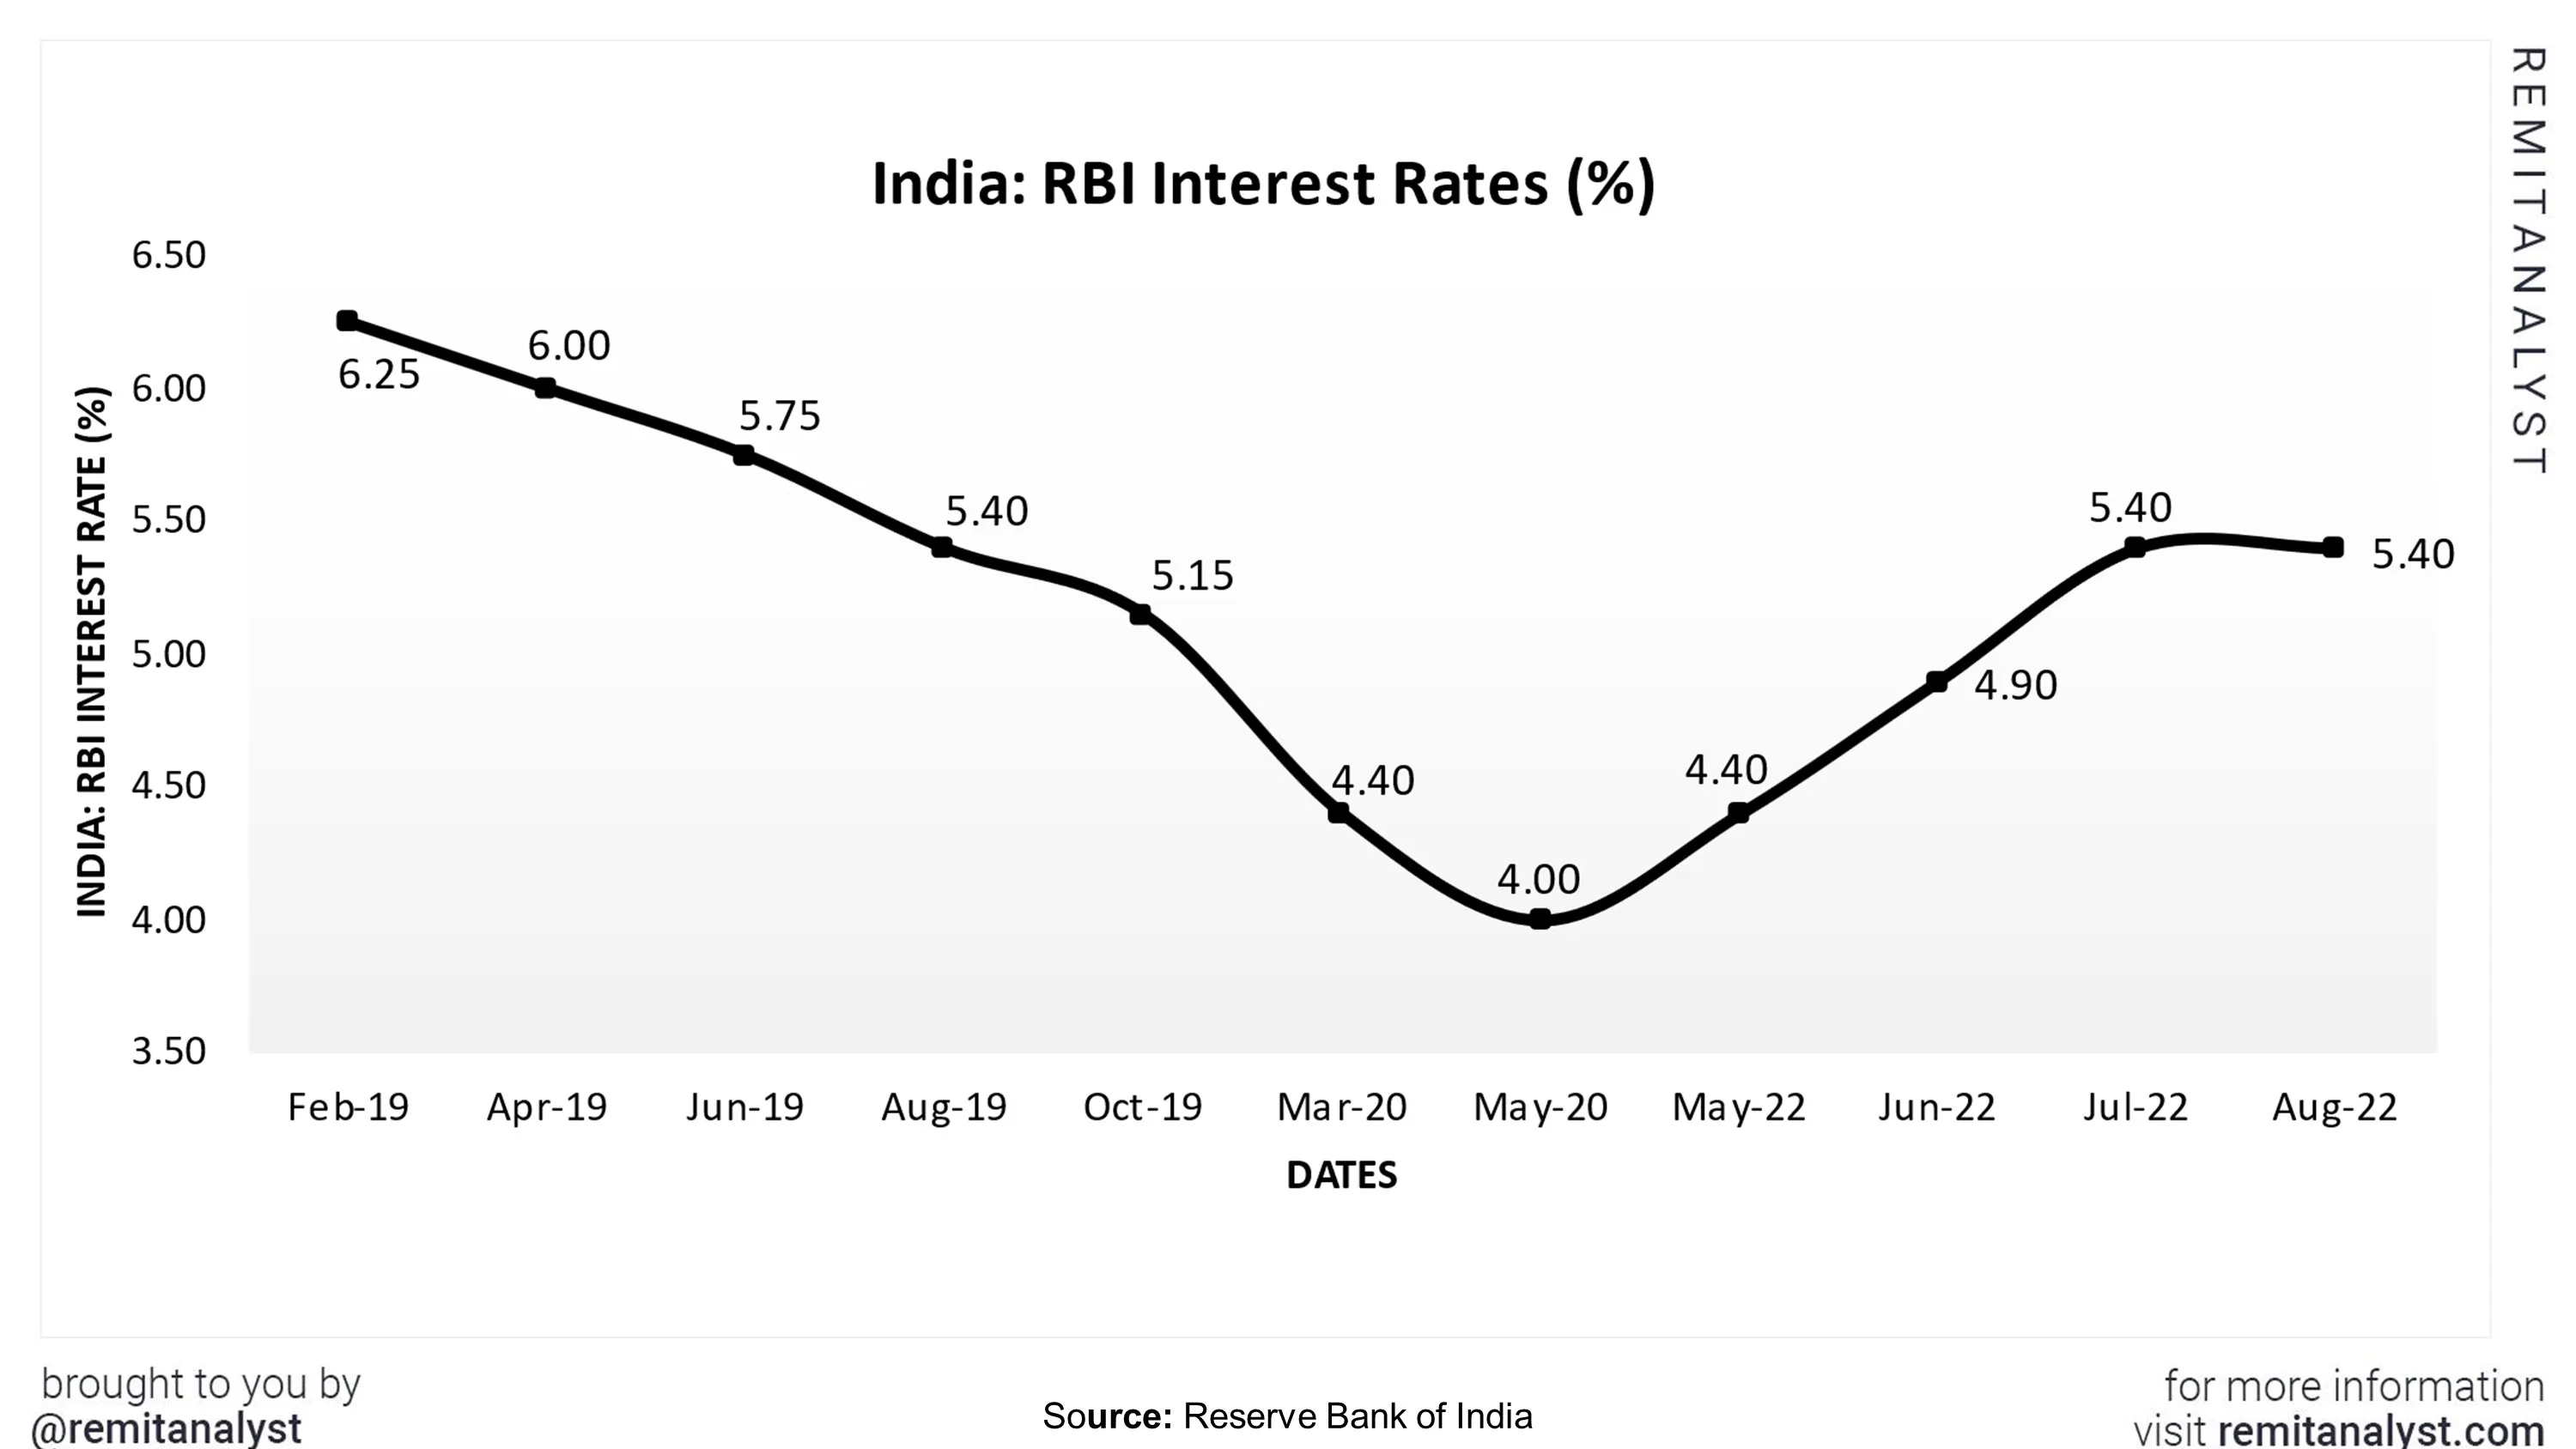 interest-rates-in-india-from-feb-2019-to-aug-2022